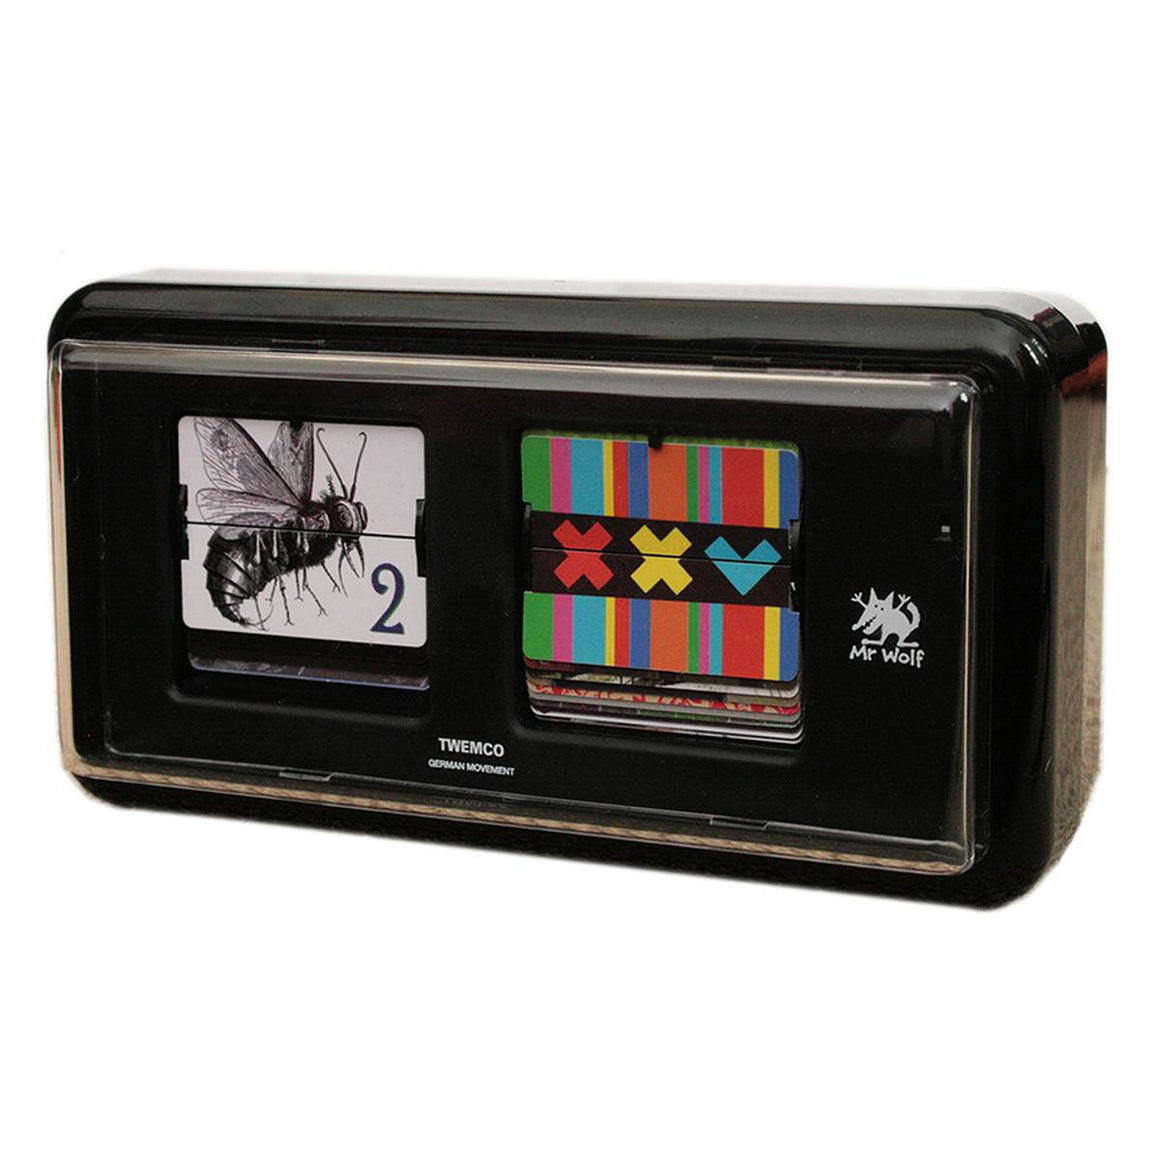 A designer clock in the style of traditional 24 Hour military flip clocks. This one however has replaced the traditional number plates with a range of images that refer to numbers. Housed in a black retro flip clock style box.